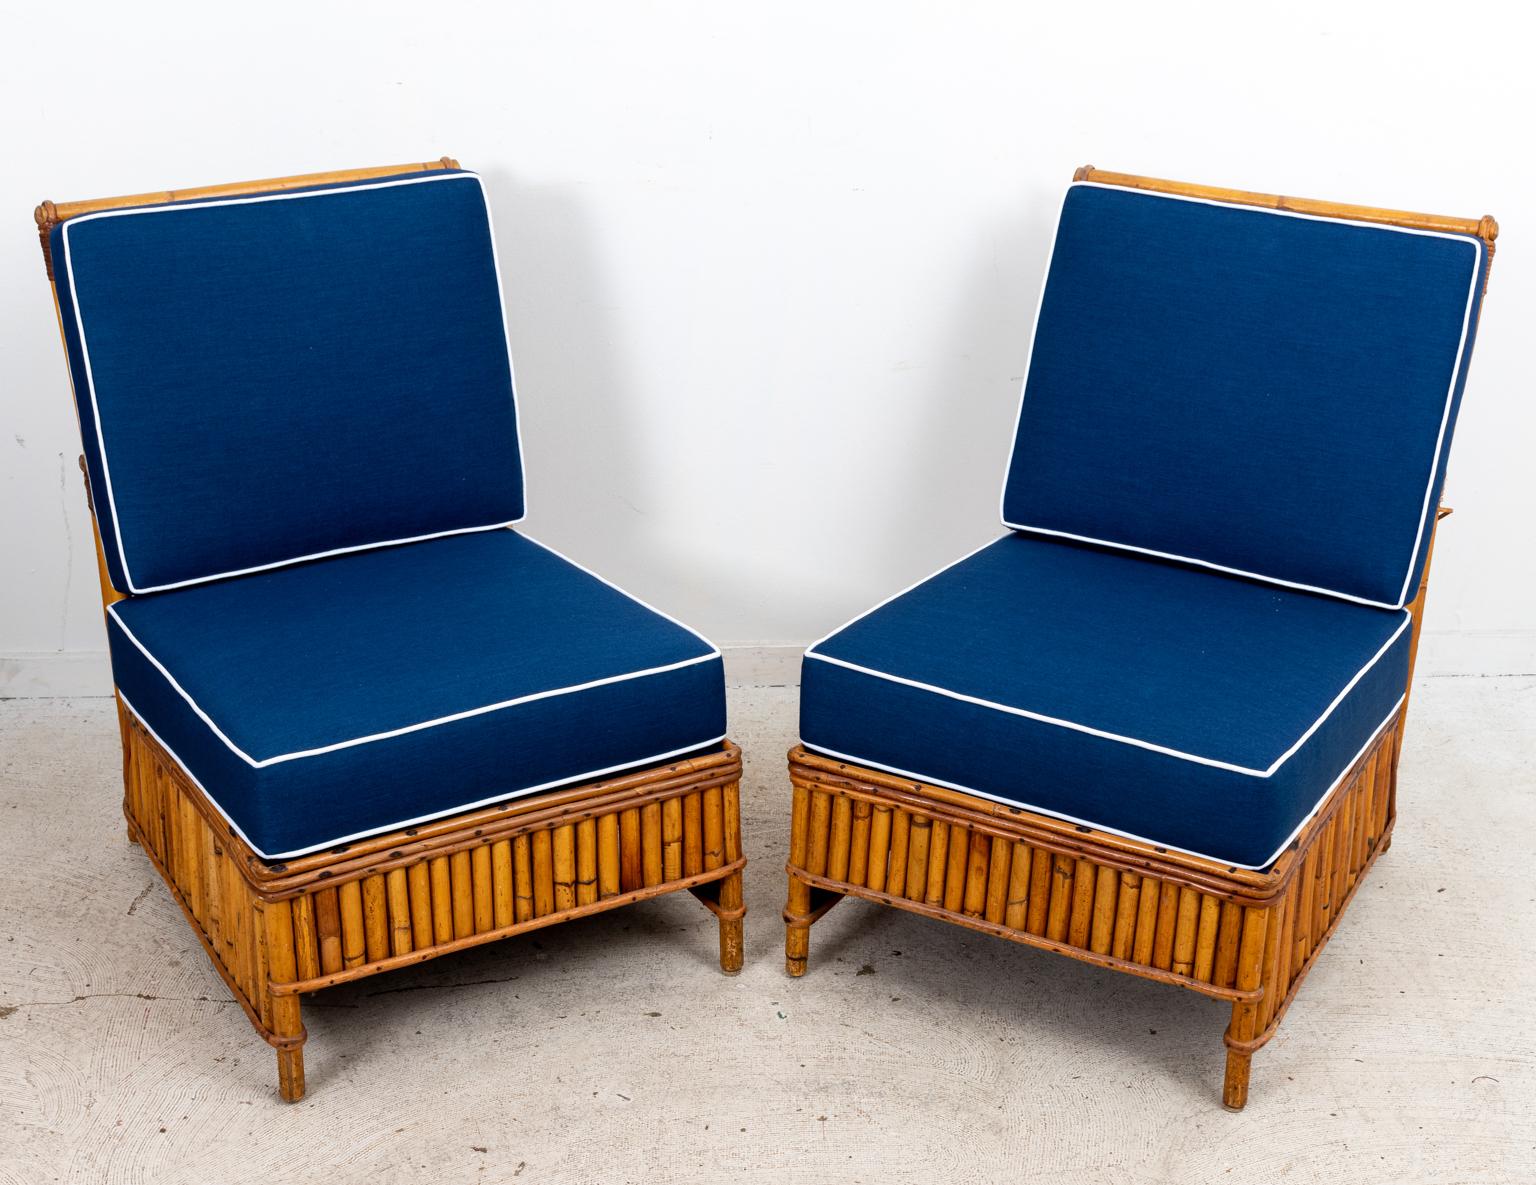 Mid-Century Modern style four piece Rattan Set with two matching side chairs, two matching armchairs, and blue upholstered cushions. The four piece set is designed for multi-functional use and can be re-arranged to accommodate two to four people.